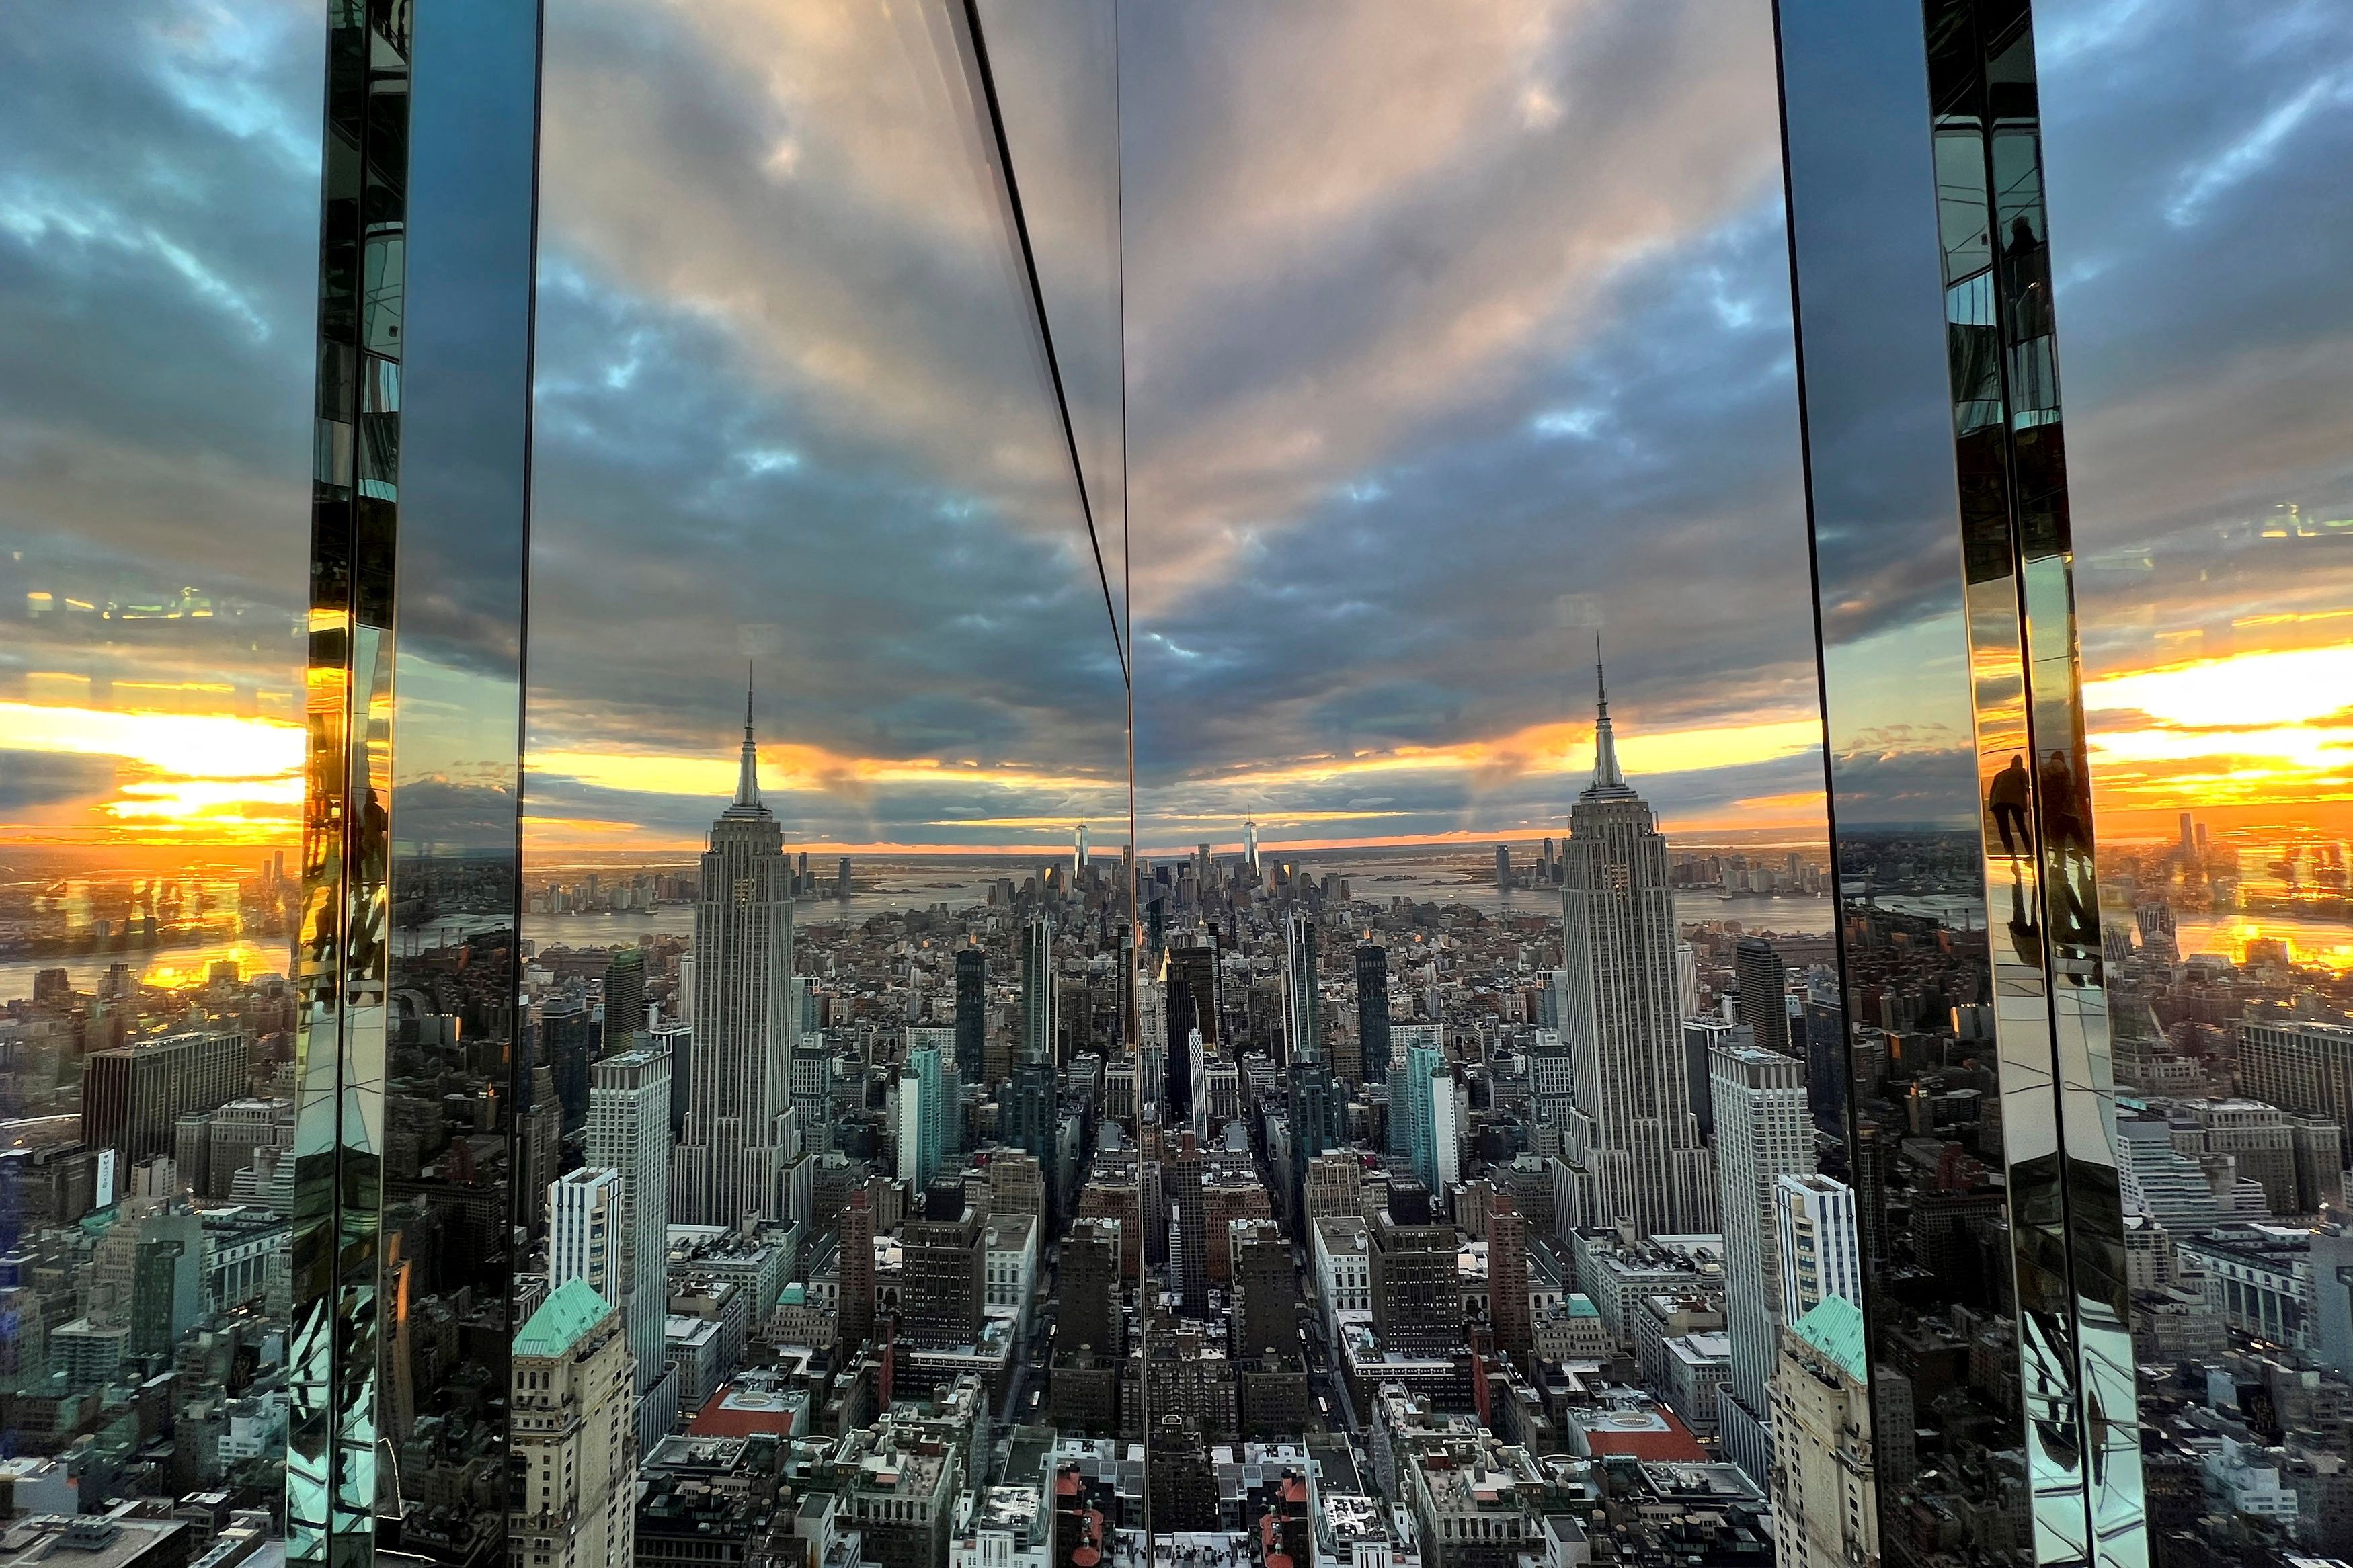 The Empire State Building and New York’s skyline are seen during the preview of SUMMIT One Vanderbilt observation deck, which is spread across the top four floors of the new One Vanderbilt tower in Midtown Manhattan, in New York City, New York, U.S., October 18, 2021. REUTERS/Eduardo Munoz/File Photo